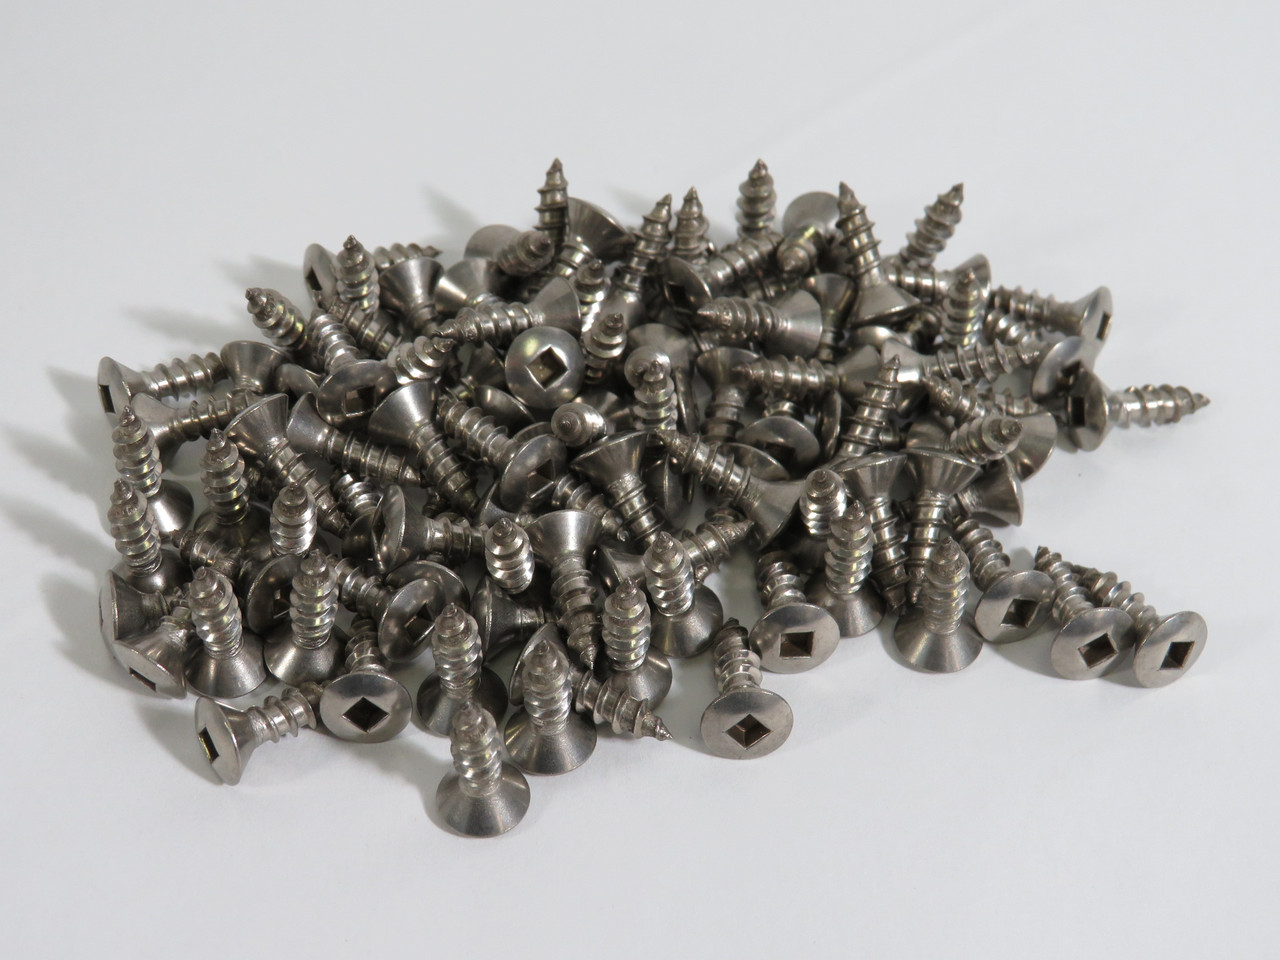 Hexco Oval Square Screw 10 X 5/8" 100-Pack NWB